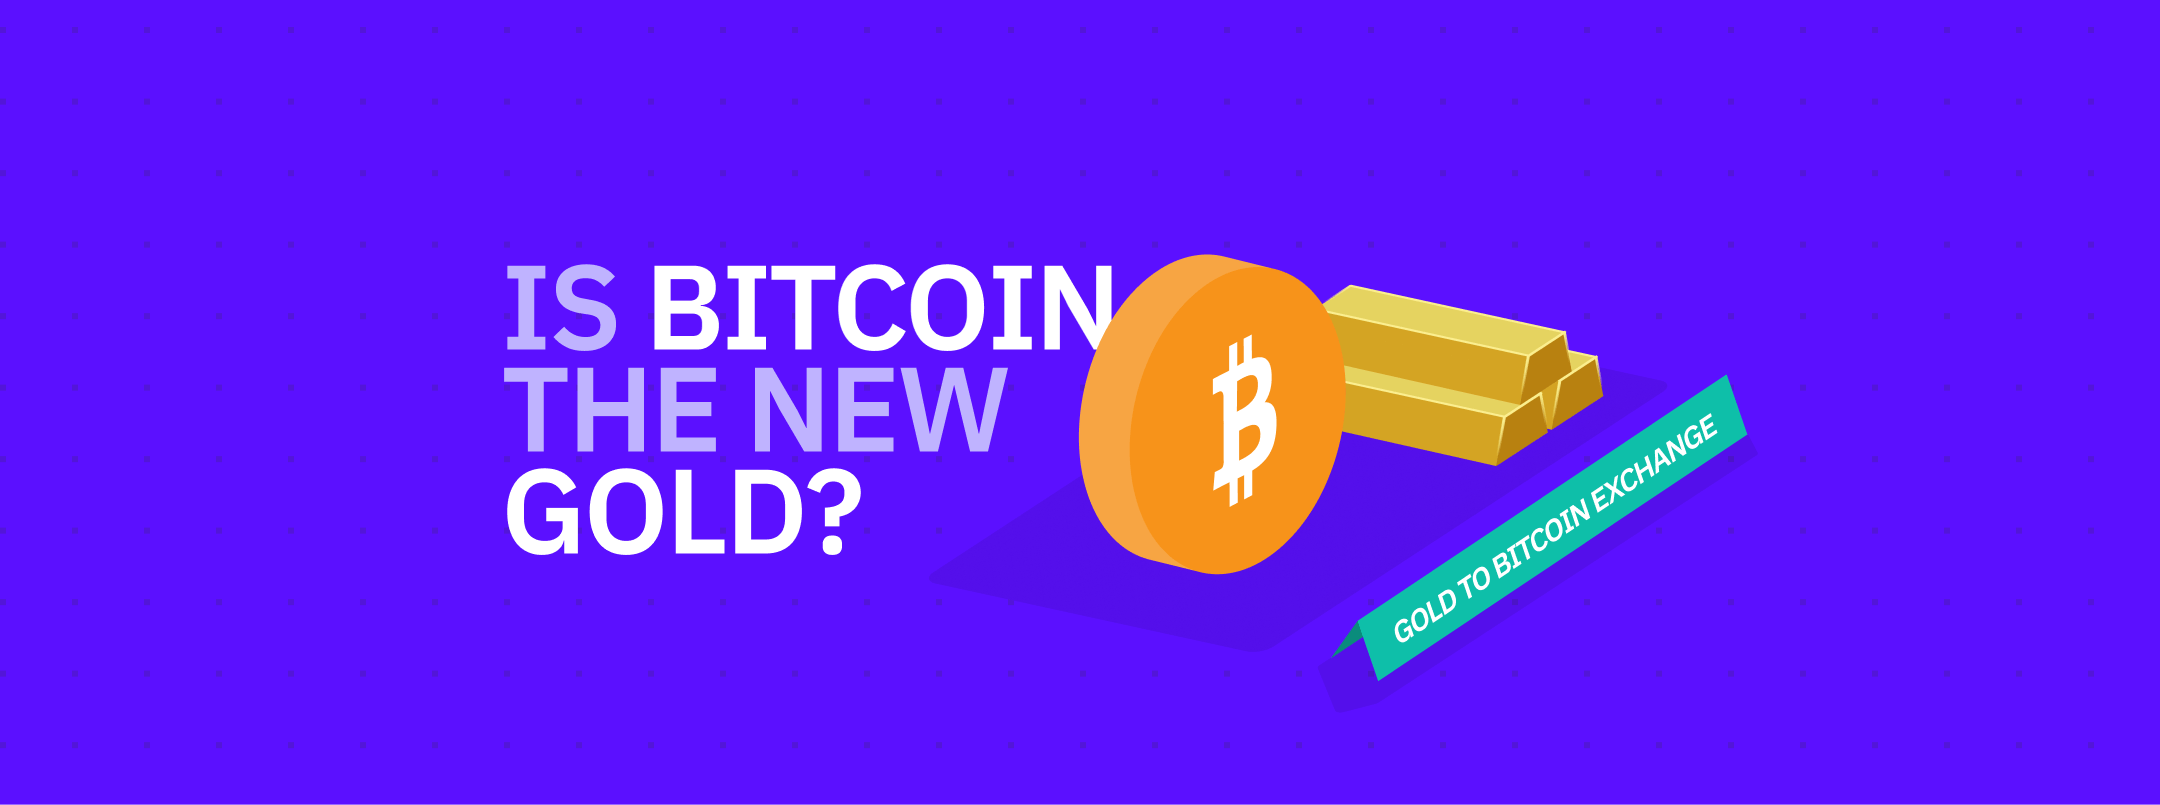 IS BITCOIN THE NEW GOLD? 
Hear What Experts Have to Say